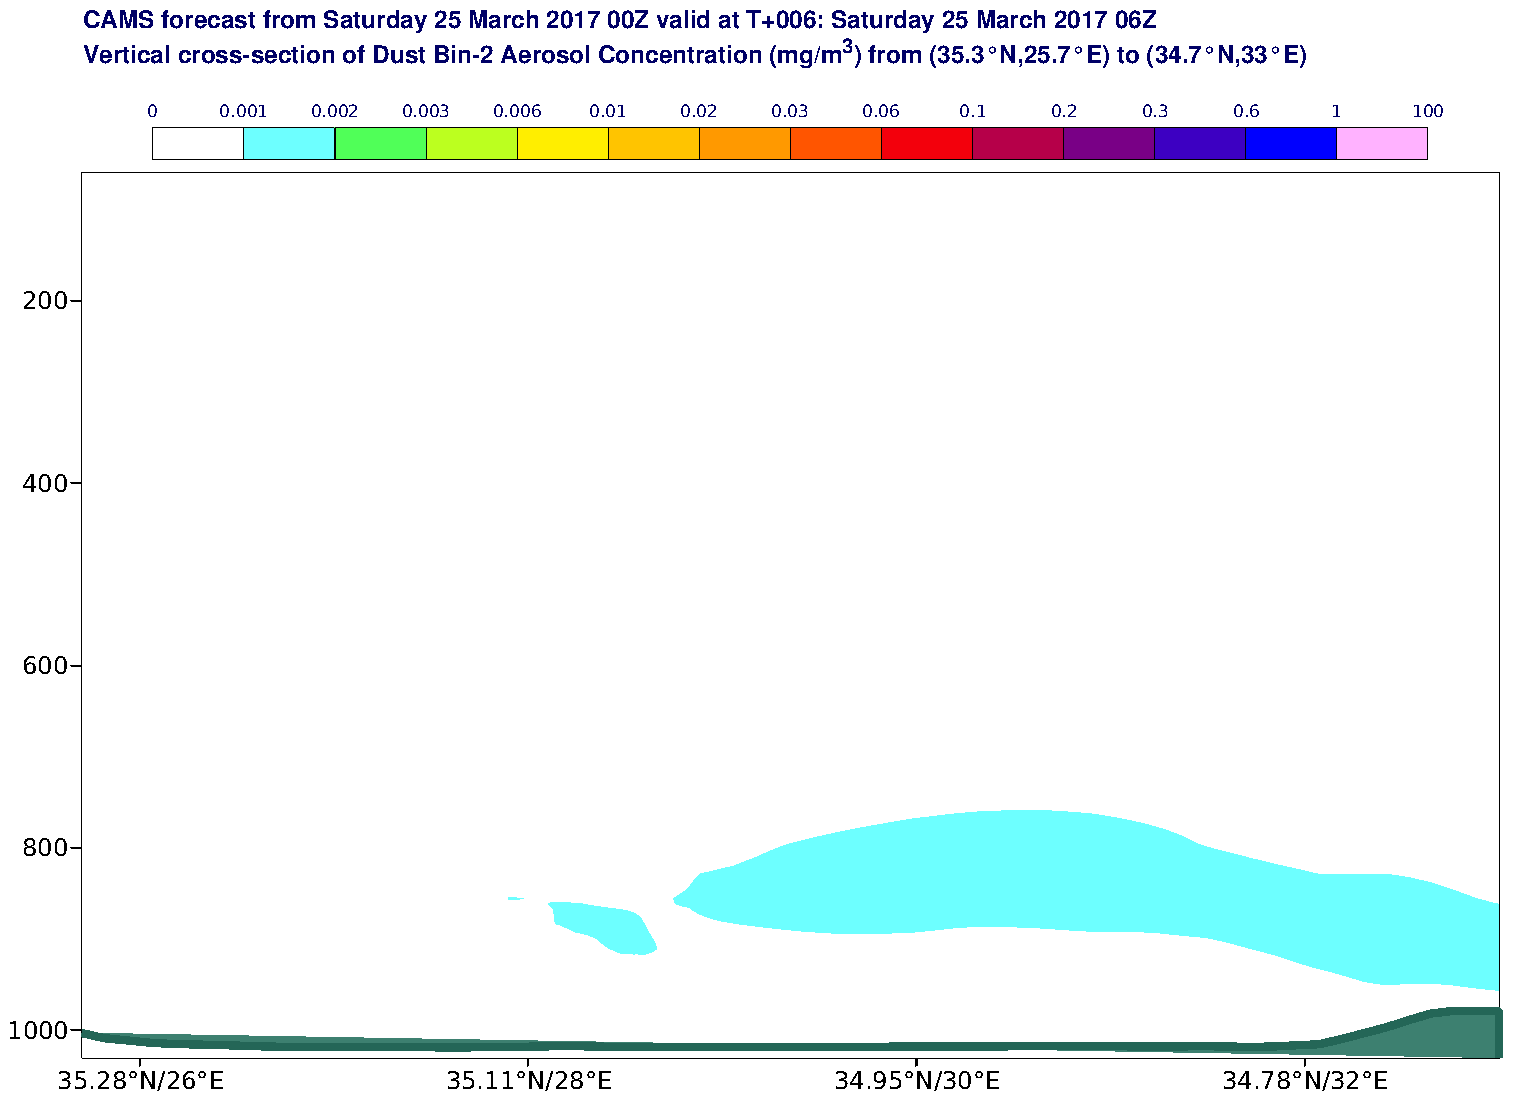 Vertical cross-section of Dust Bin-2 Aerosol Concentration (mg/m3) valid at T6 - 2017-03-25 06:00